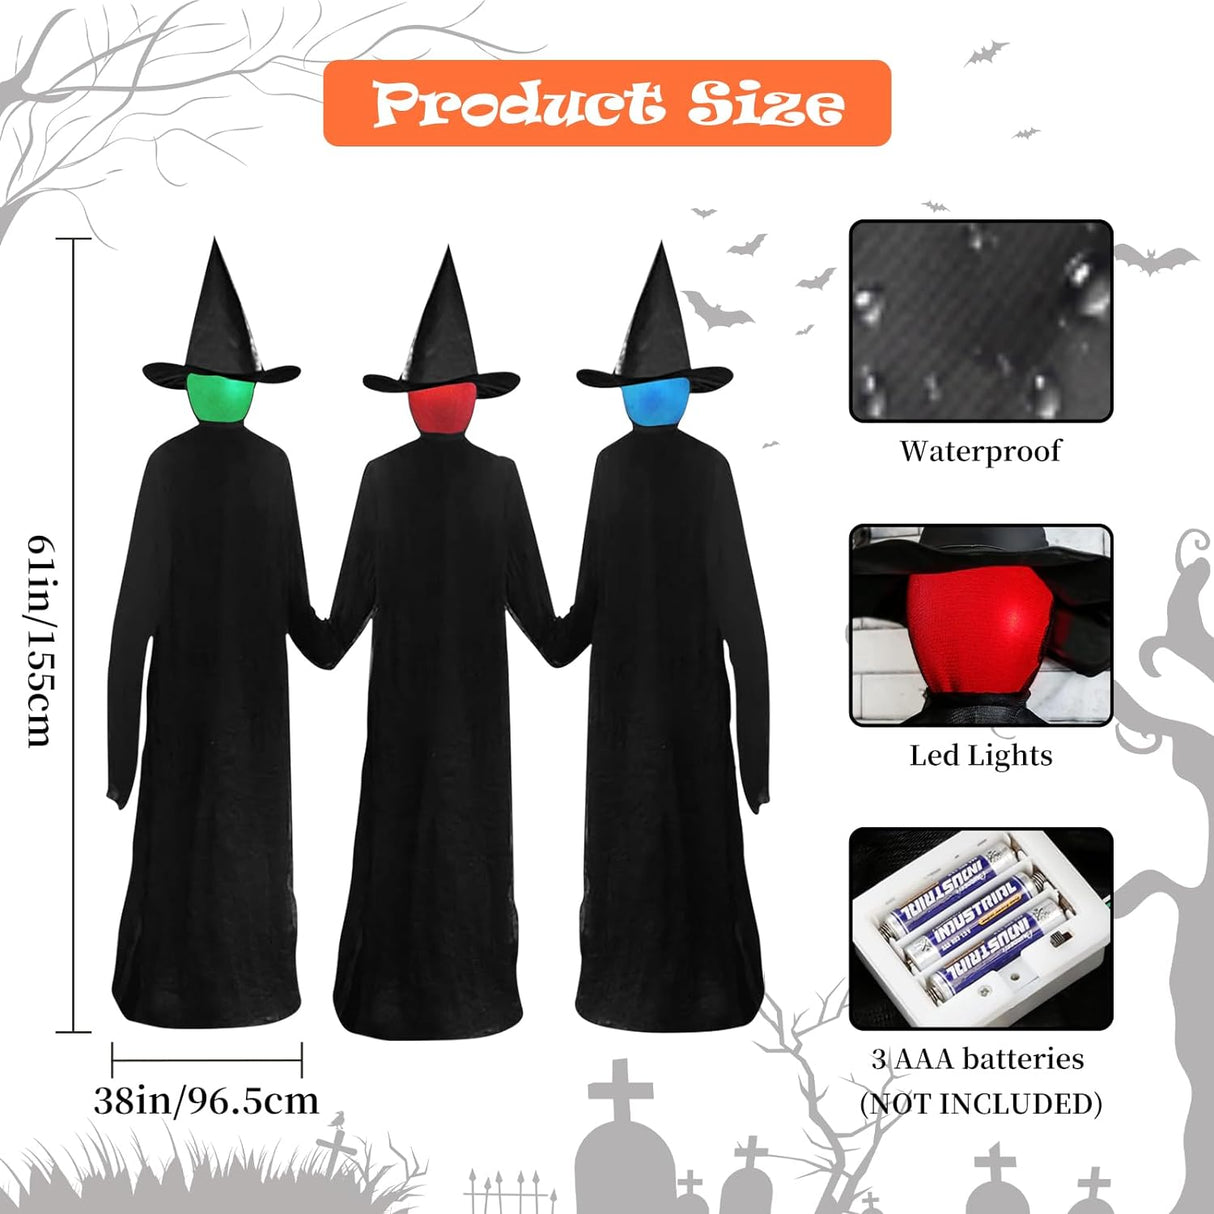 5 Ft Light up Witch Stakes Halloween Yard Decorations, Large Lighted Witch Sound Activated Halloween Props for Scary Halloween Yard, Patio, Haunted House Decorations Outside